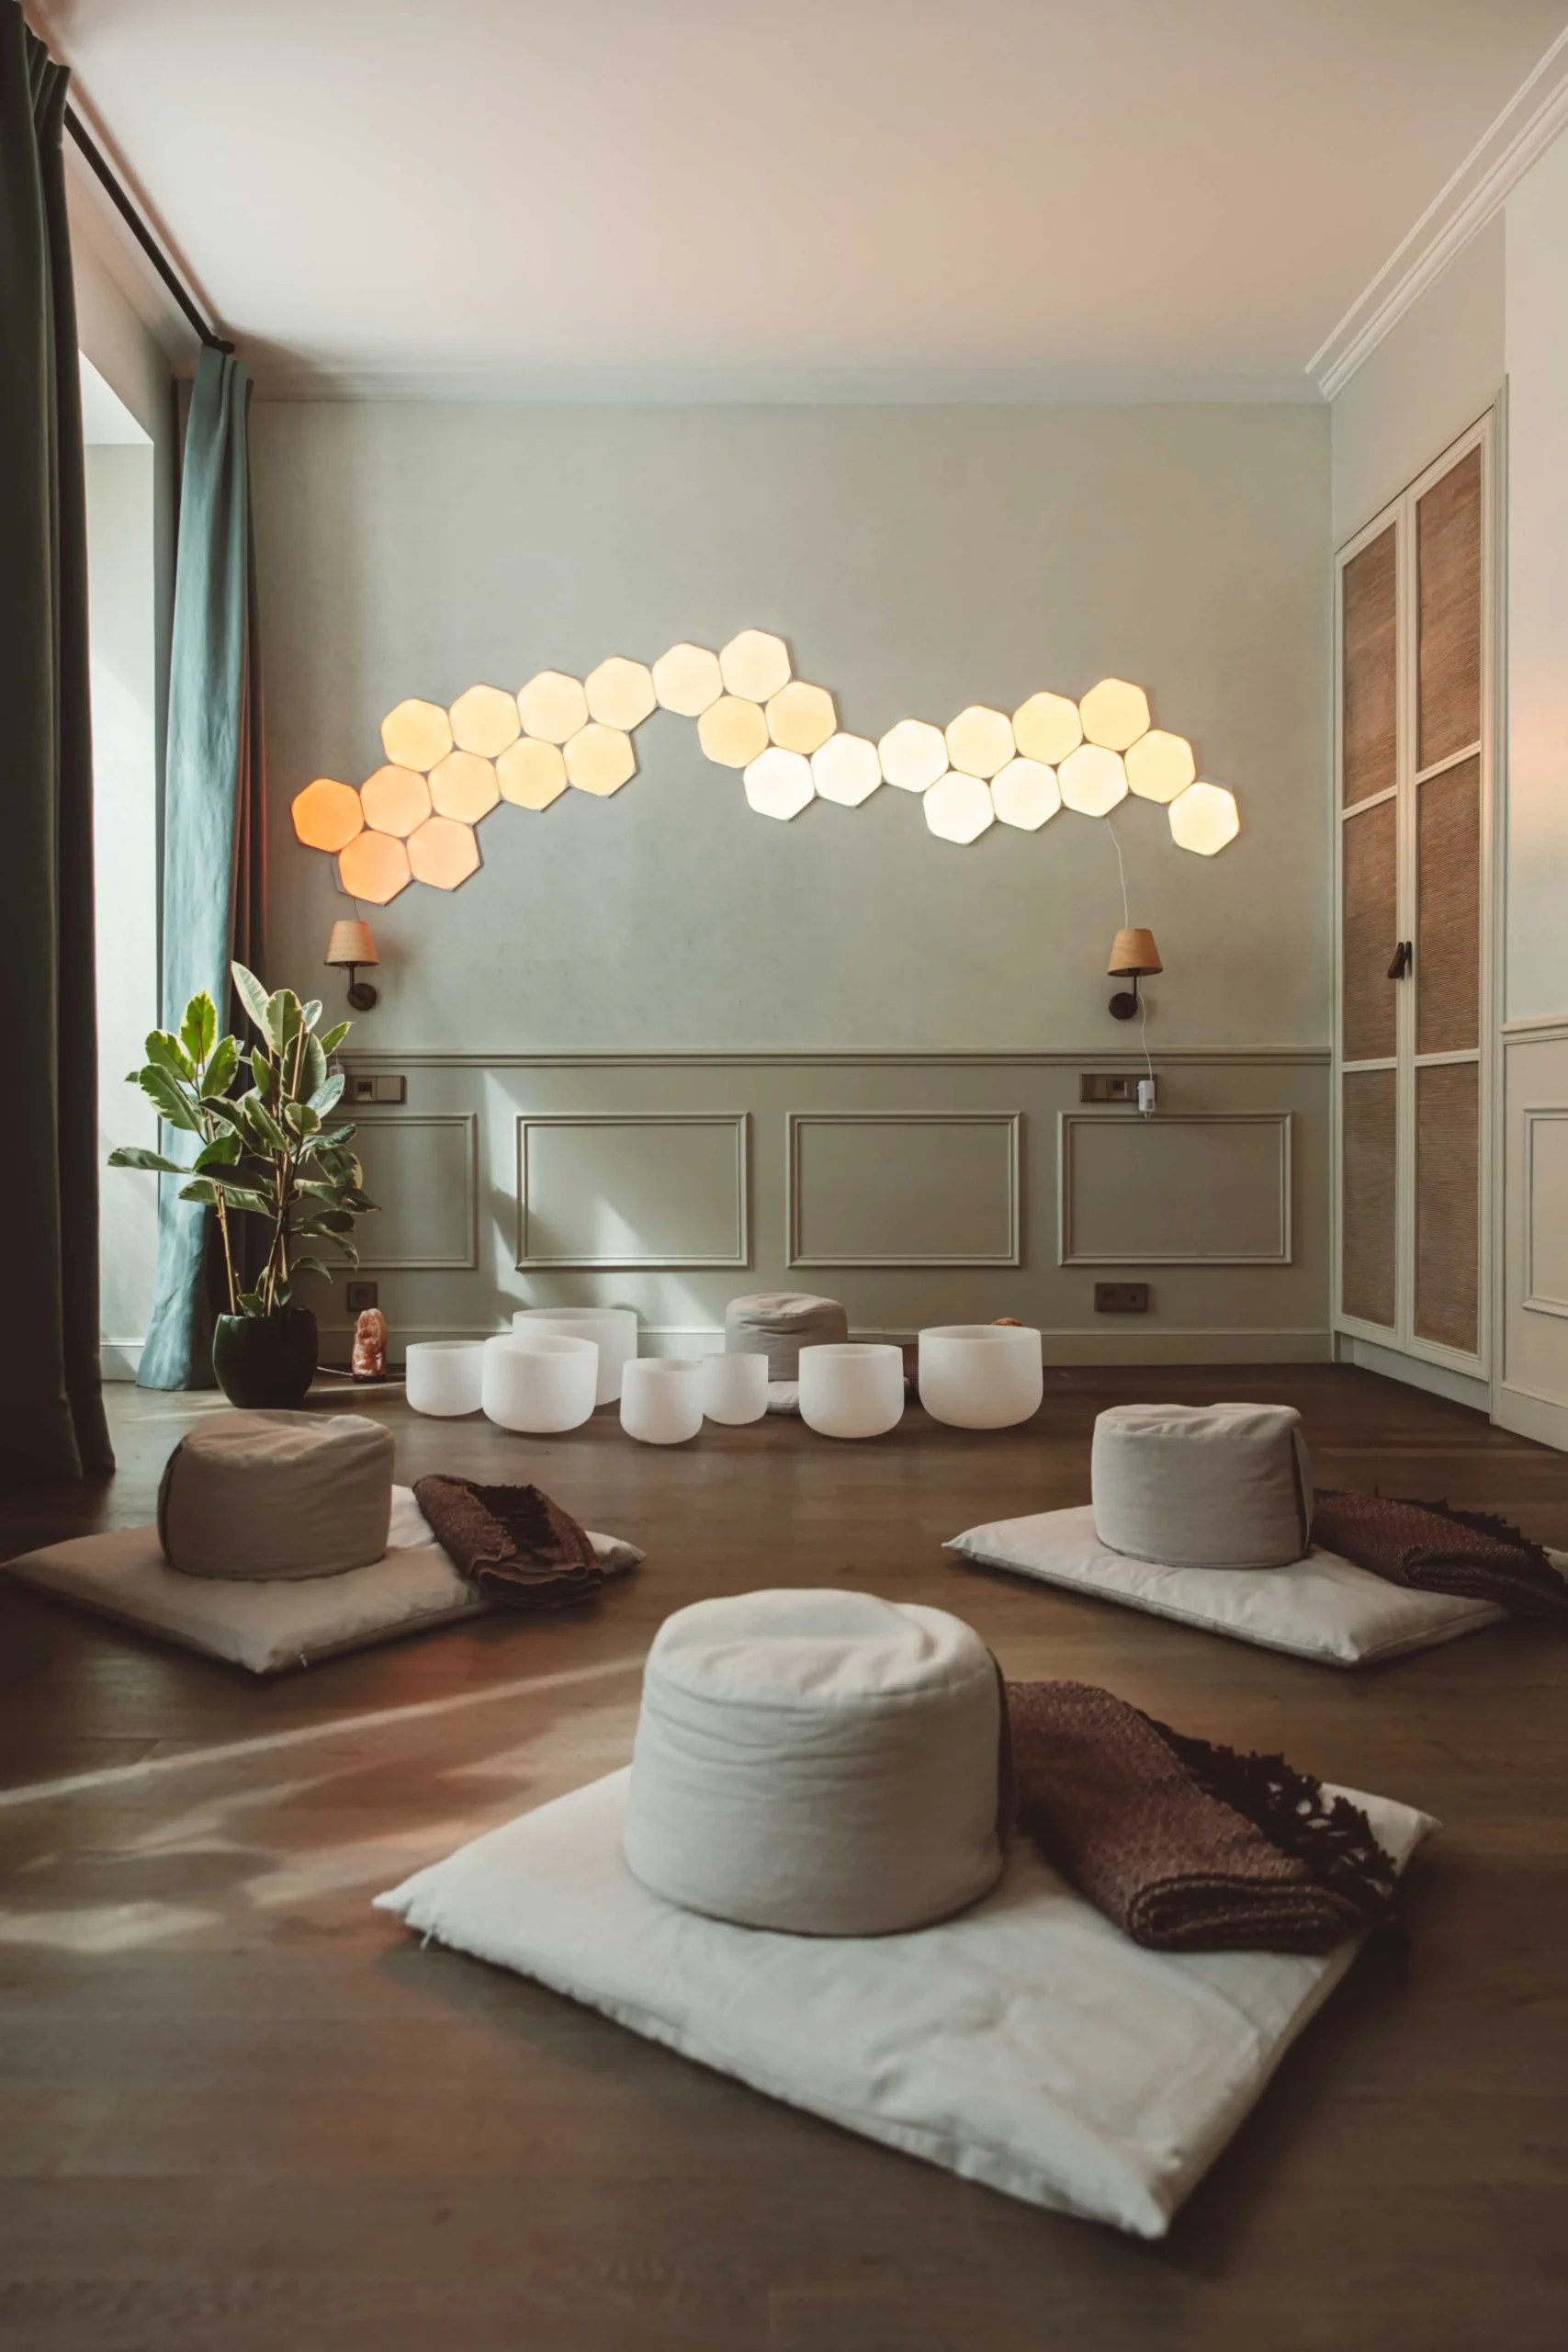 Serene meditation space at Home of Yoga (HOY) Hotel Paris, featuring a geometric light installation, floor cushions for mindfulness practice, and an ambiance conducive to eco-friendly relaxation.